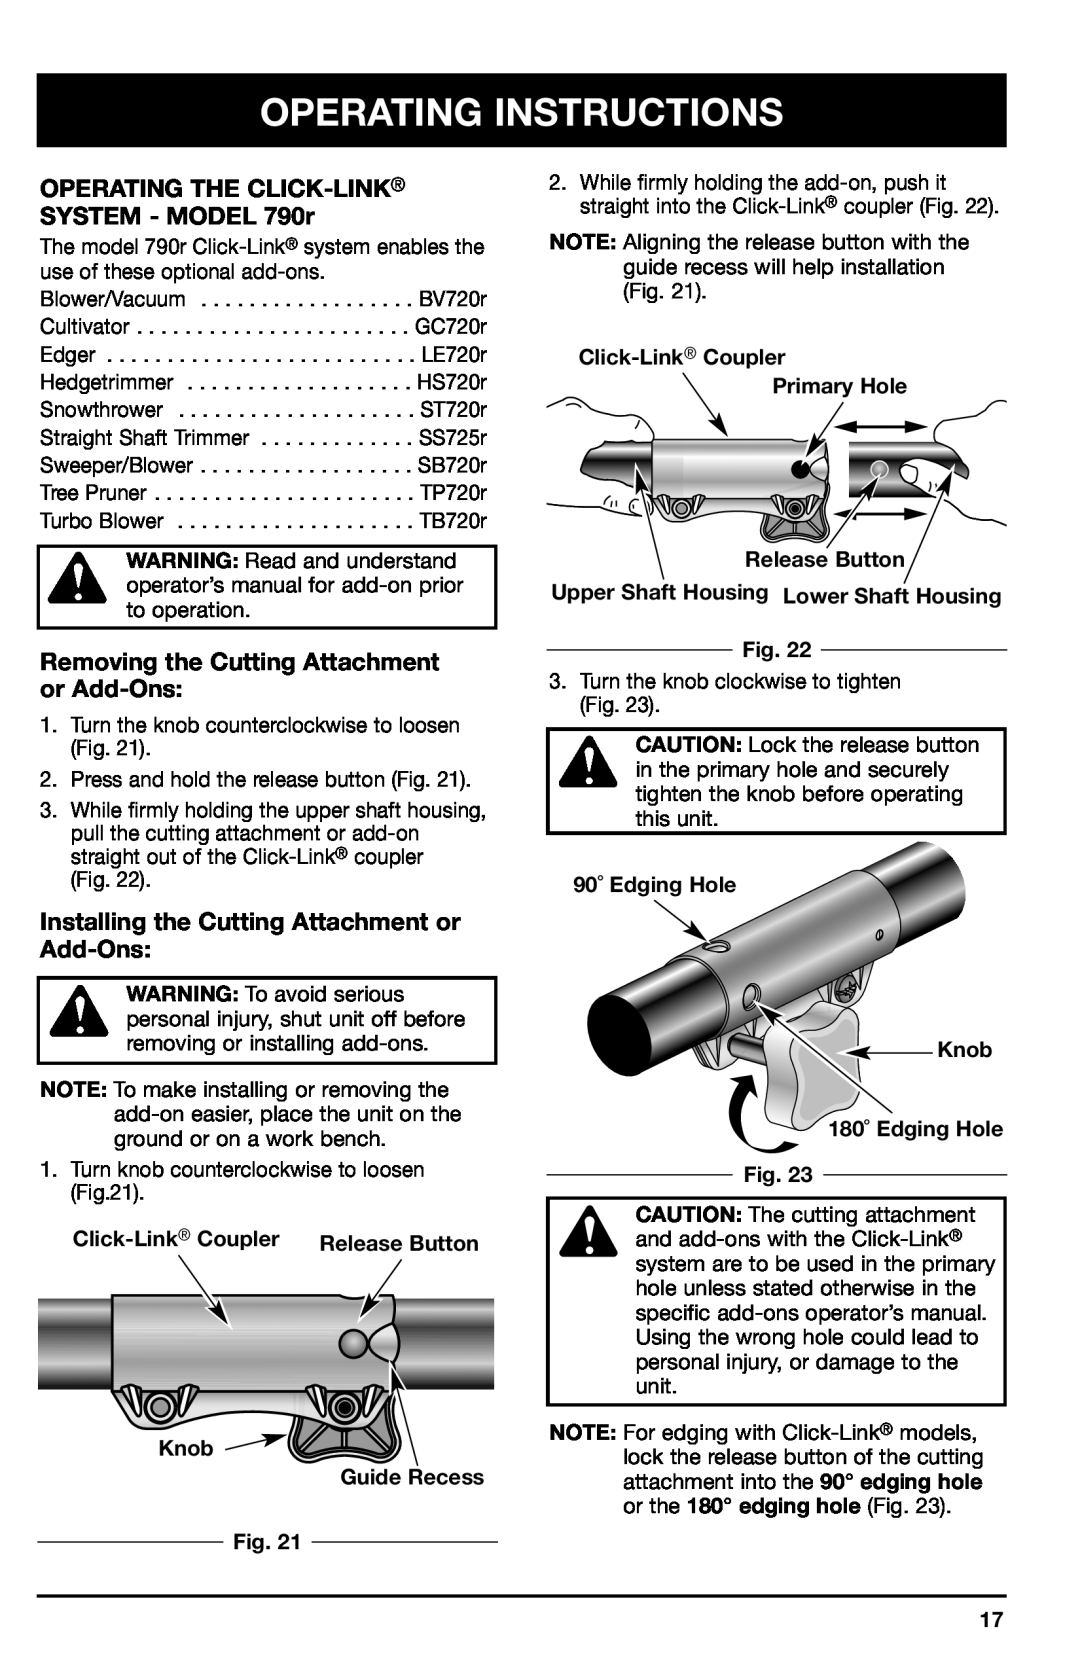 Ryobi 780r Operating Instructions, OPERATING THE CLICK-LINK SYSTEM - MODEL 790r, Click-Link Coupler, Knob Guide Recess 